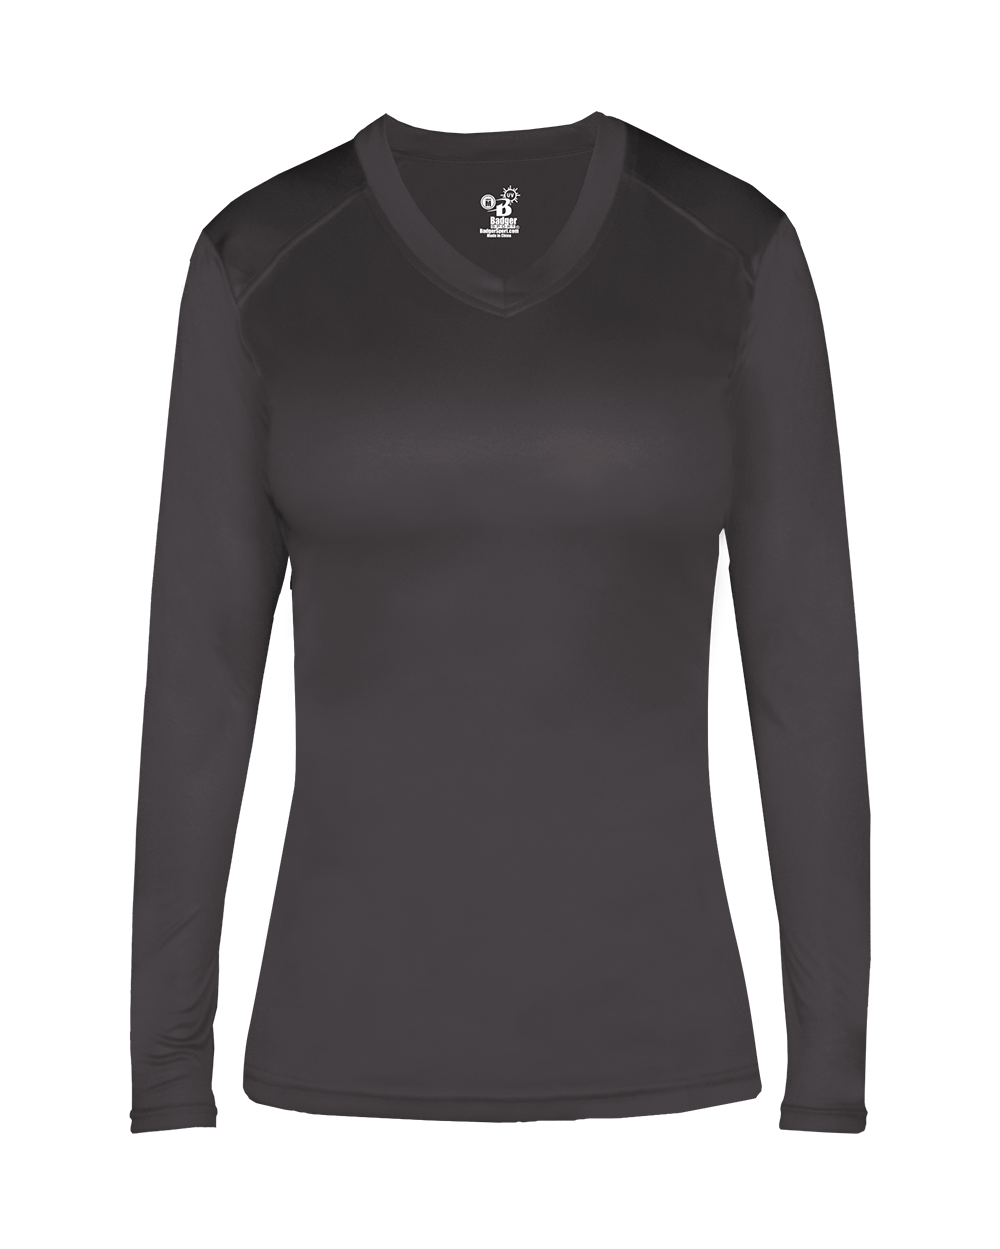 Ultimate Ladies' Fitted L/S V-